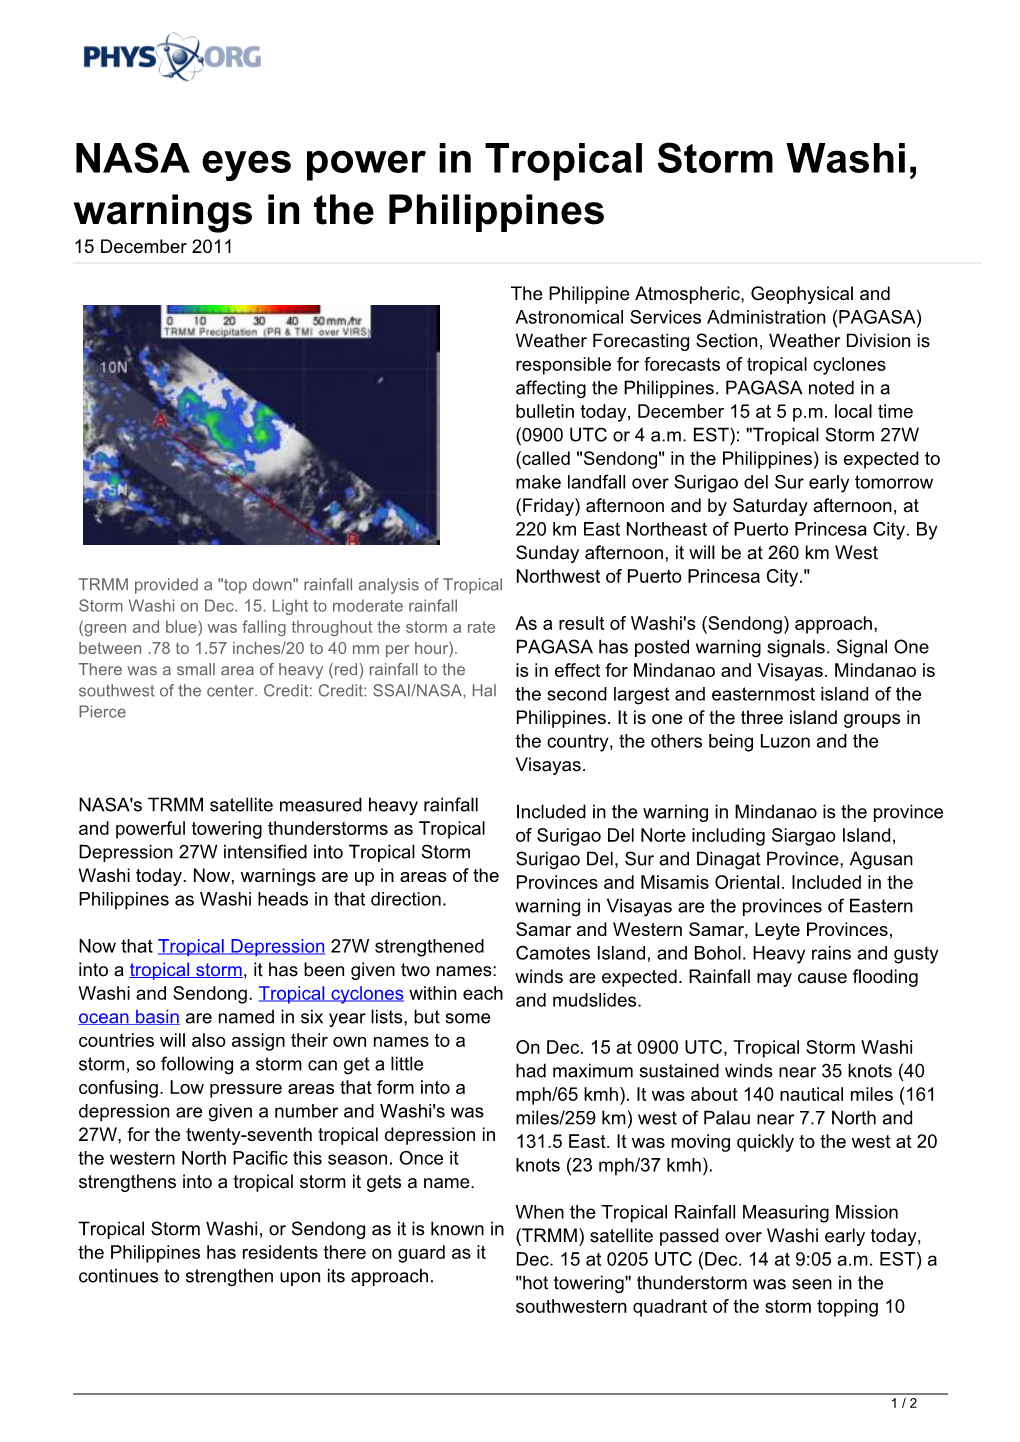 NASA Eyes Power in Tropical Storm Washi, Warnings in the Philippines 15 December 2011